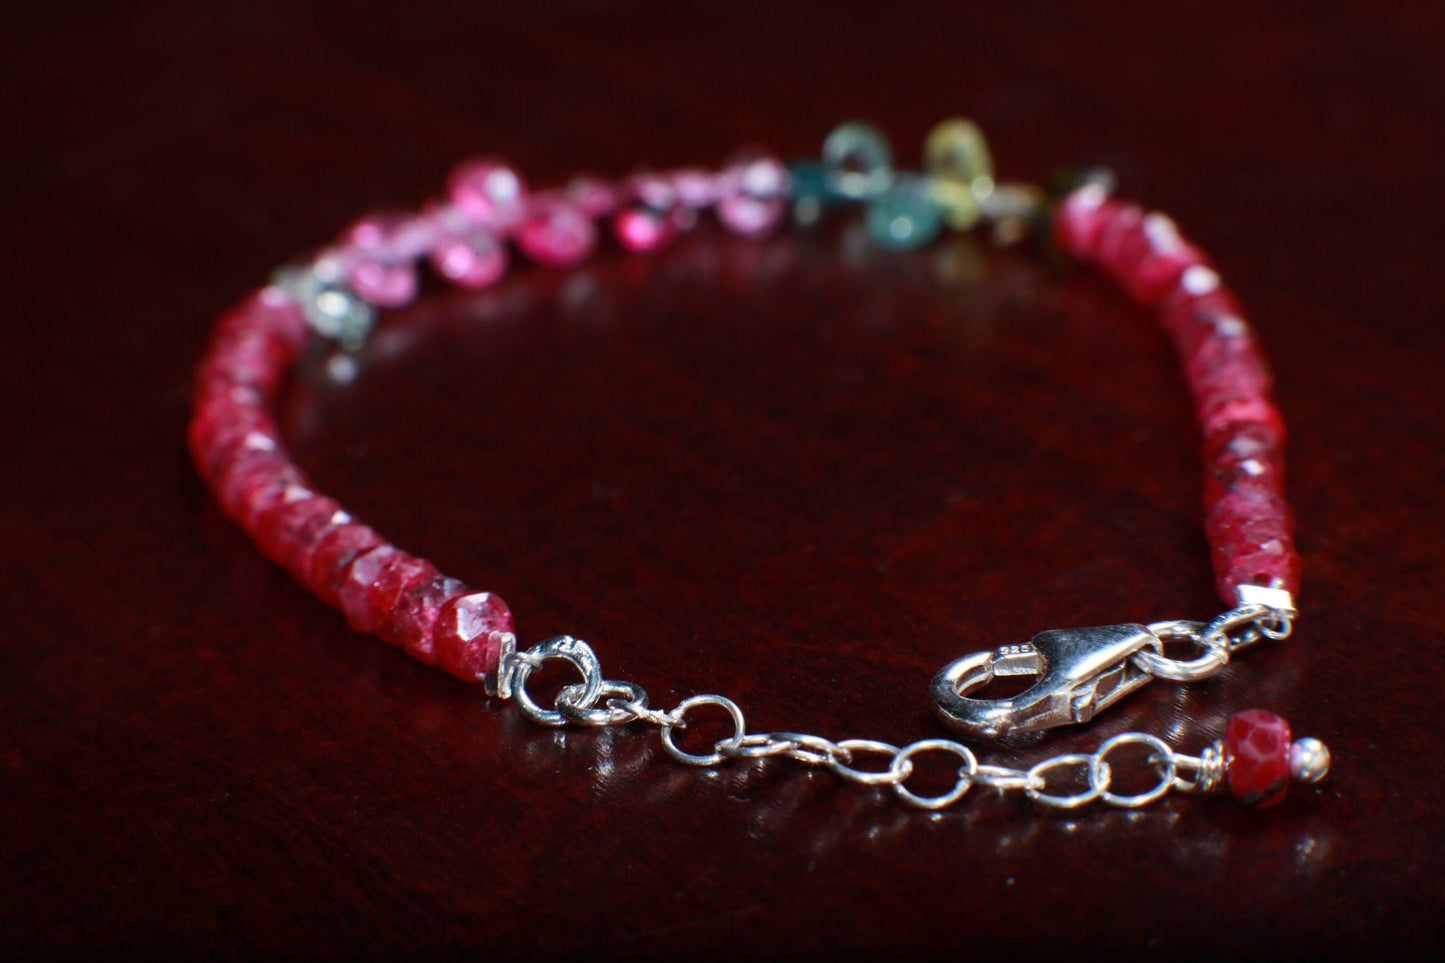 Tourmaline Bracelet AAA Faceted Briolette Teardrop & Genuine Ruby Faceted Rondelle Bracelet in 925 Sterling Silver Chain,Clasp, Gift for her